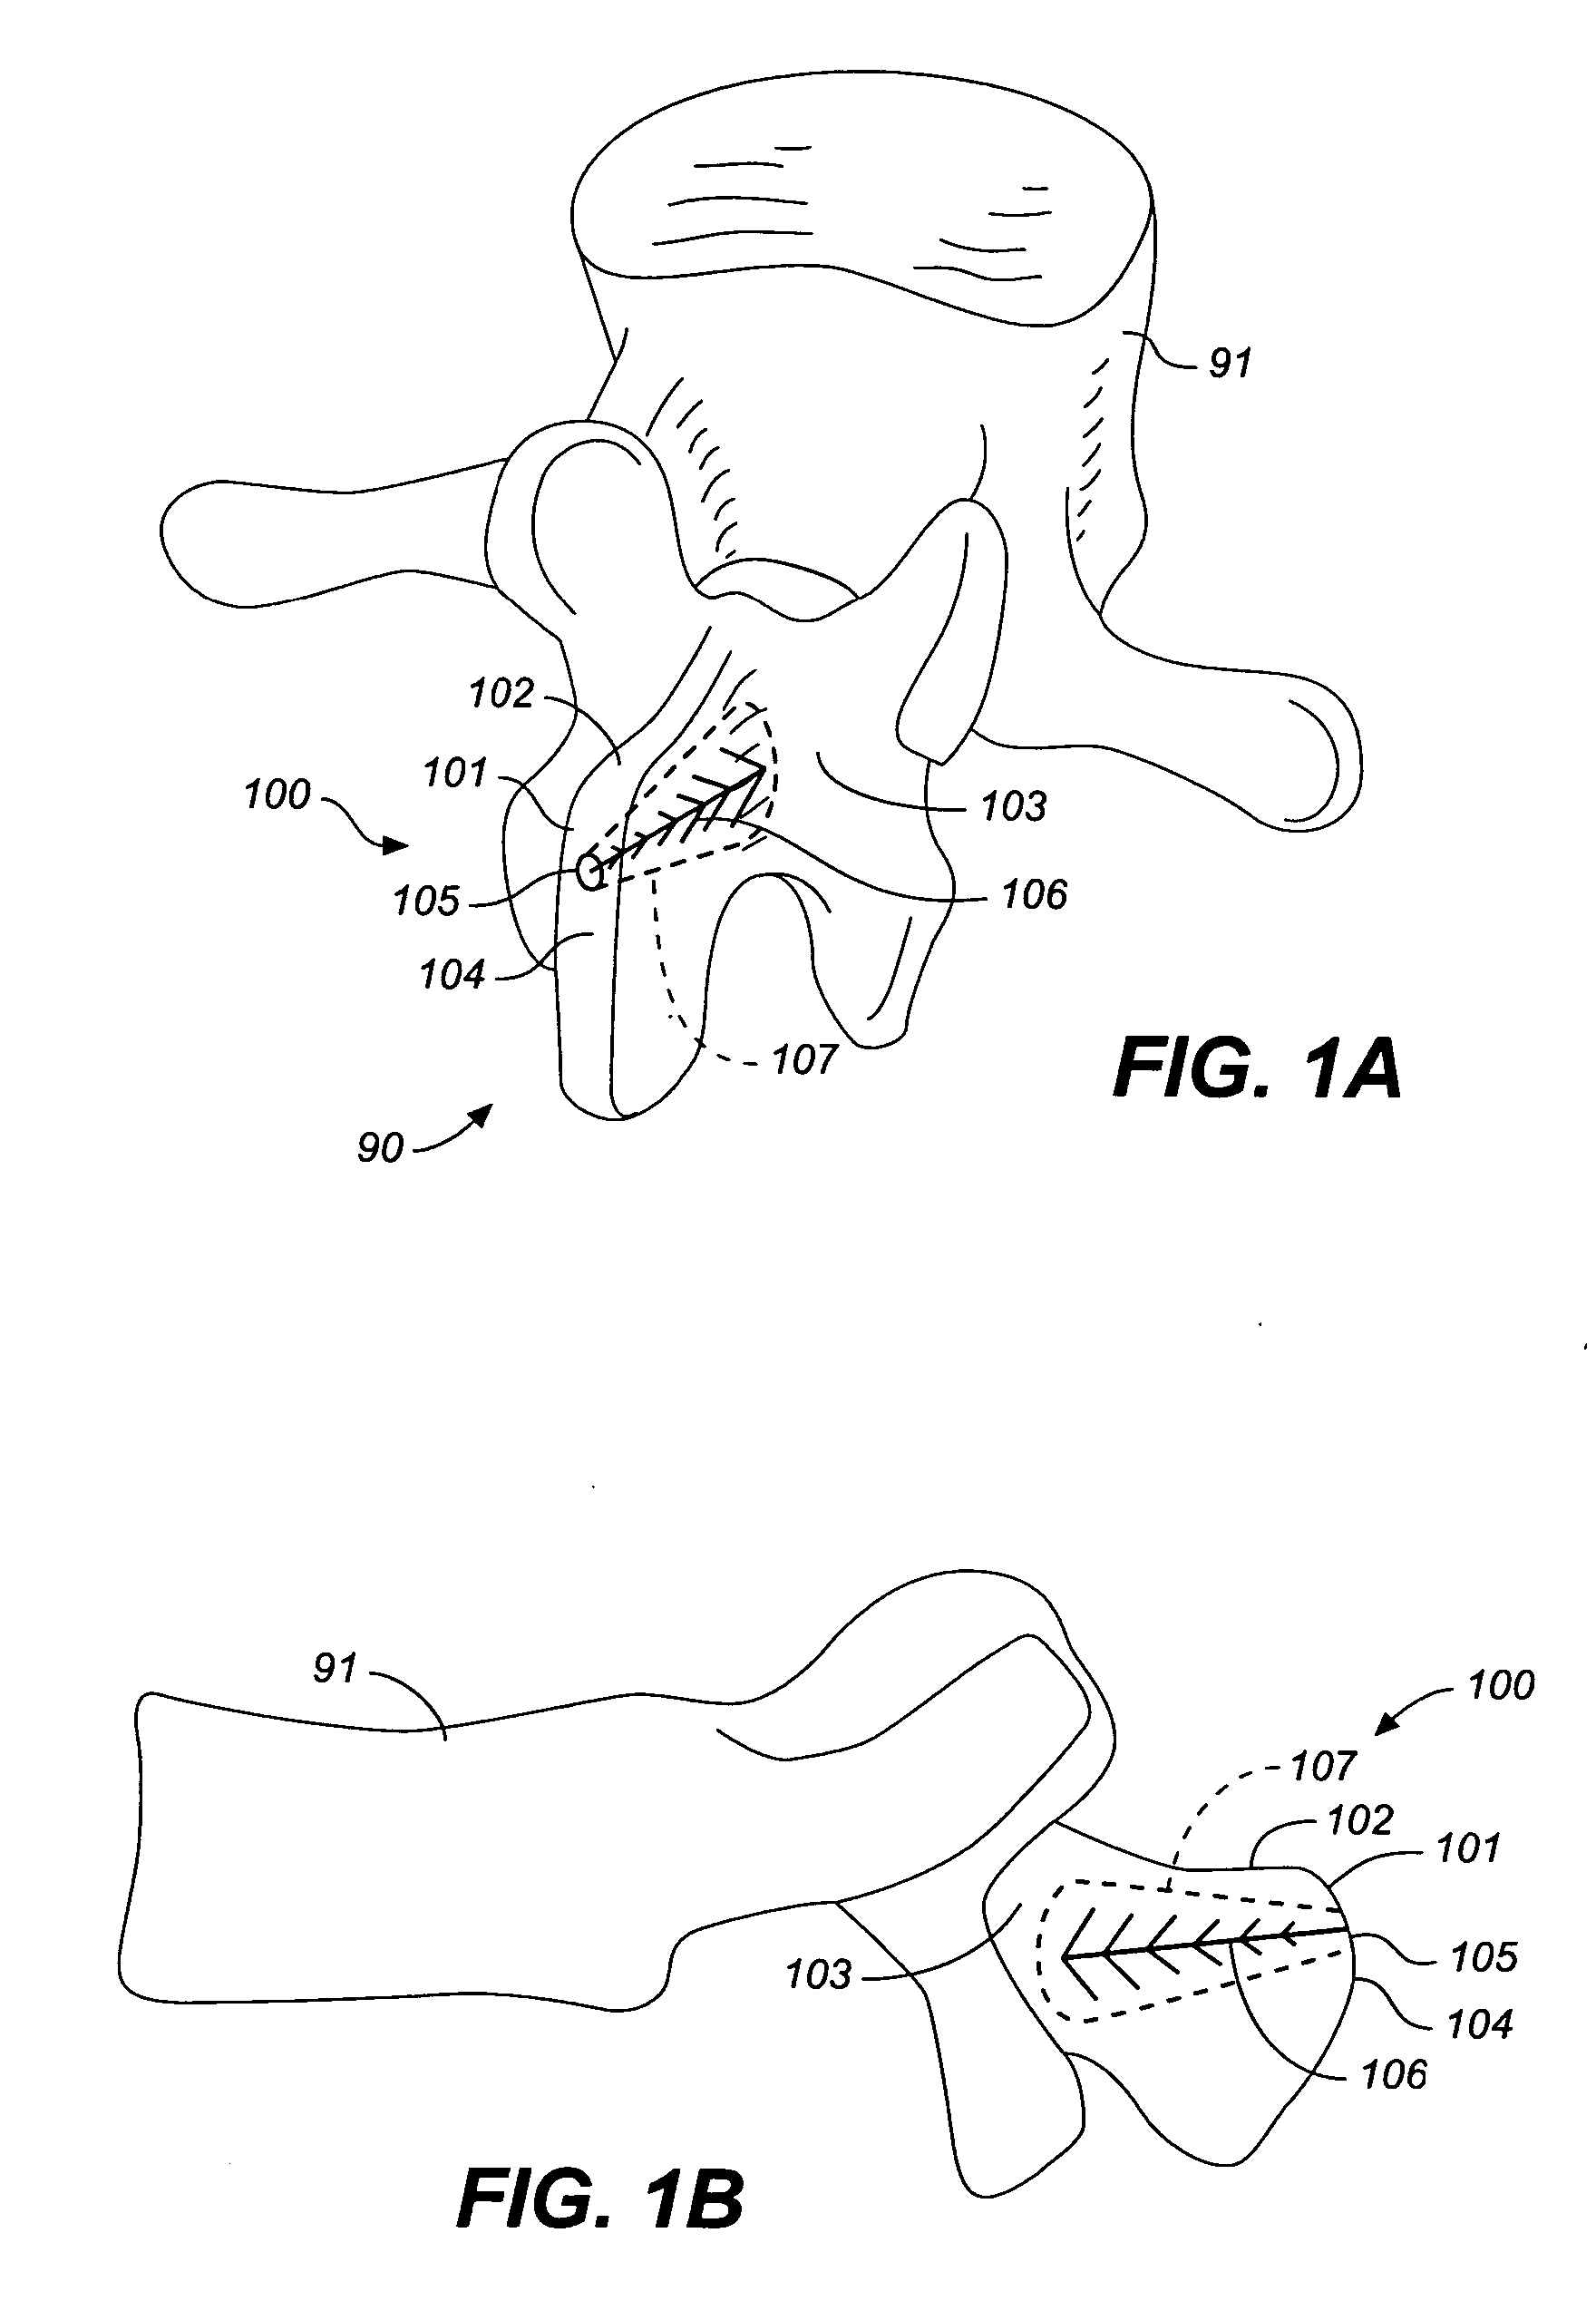 Spine treatment devices and methods